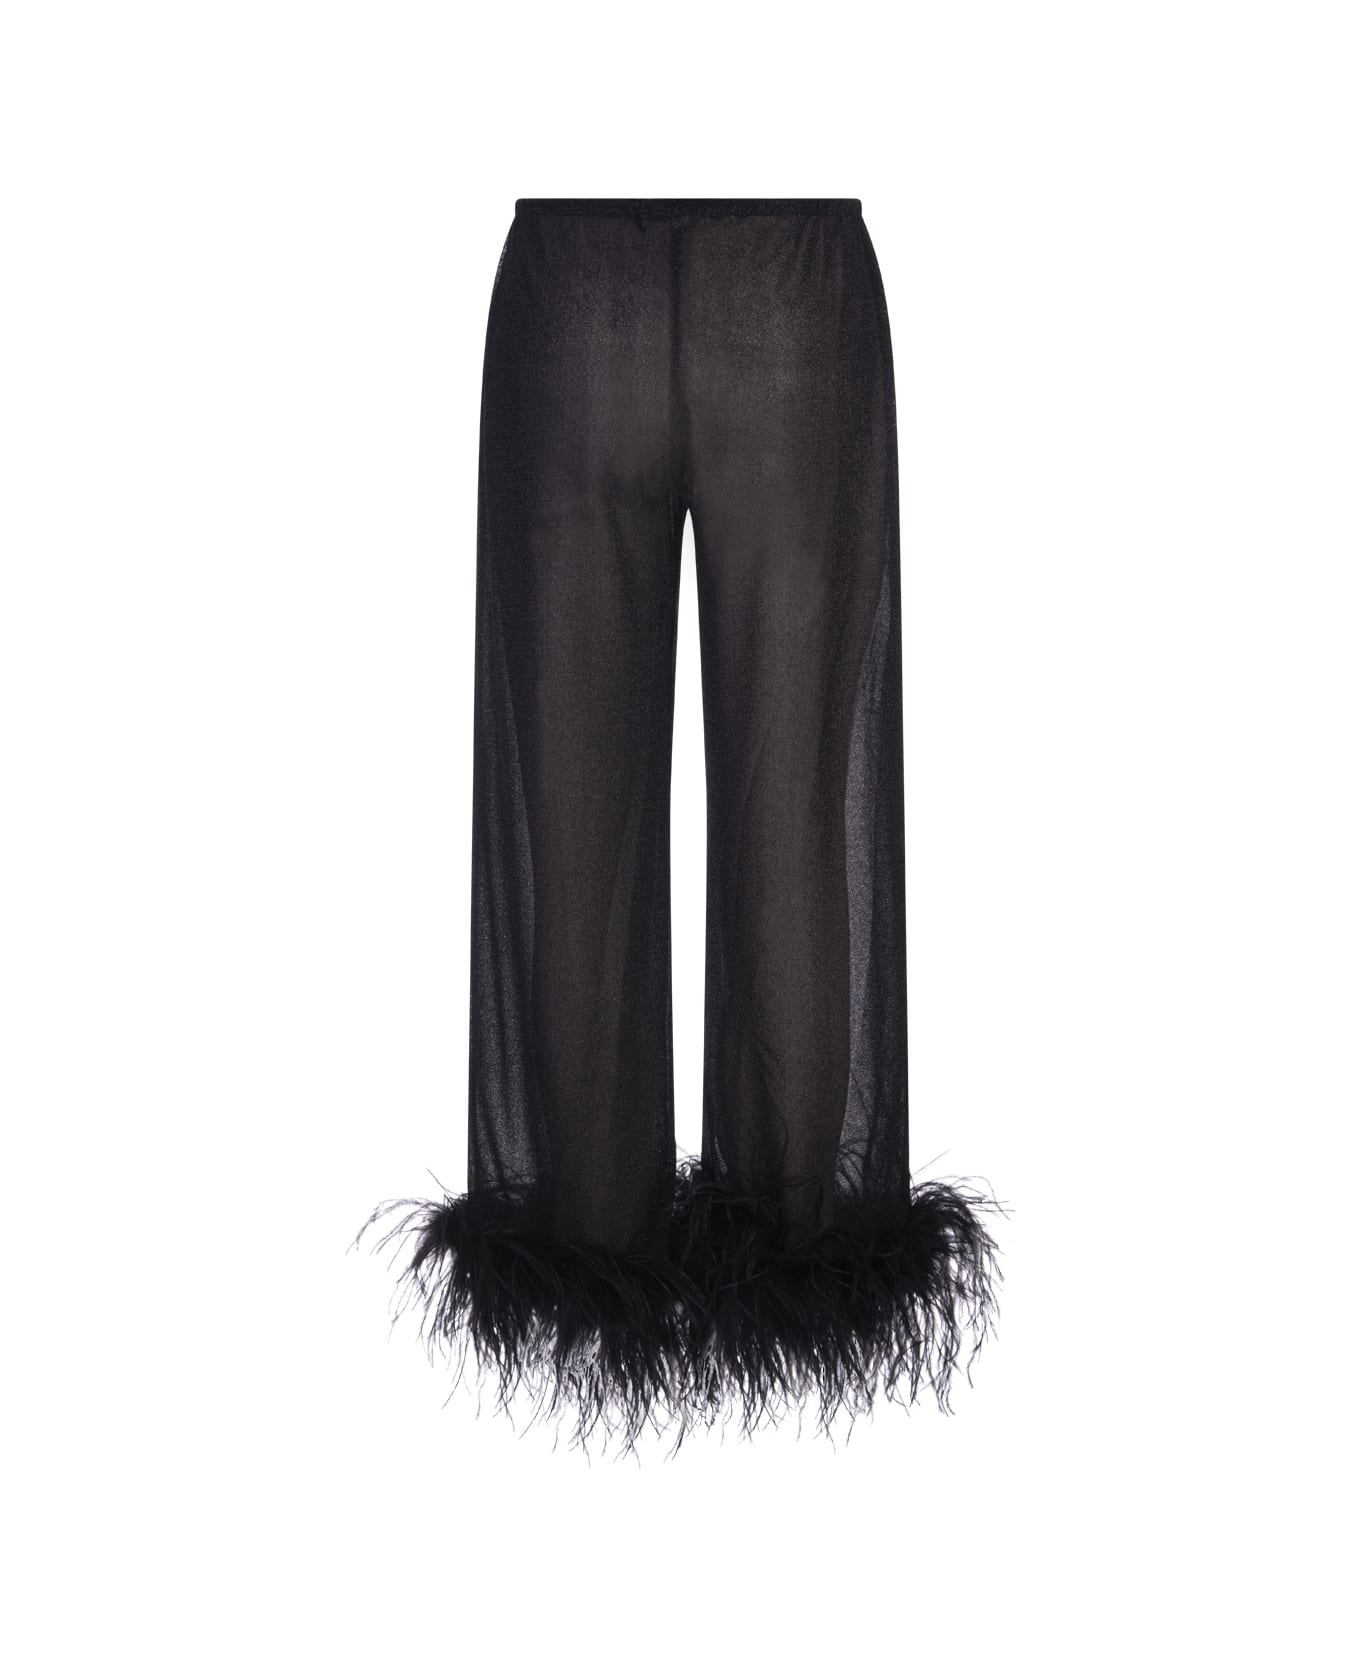 Oseree Black Lumiere Plumage Trousers - Black